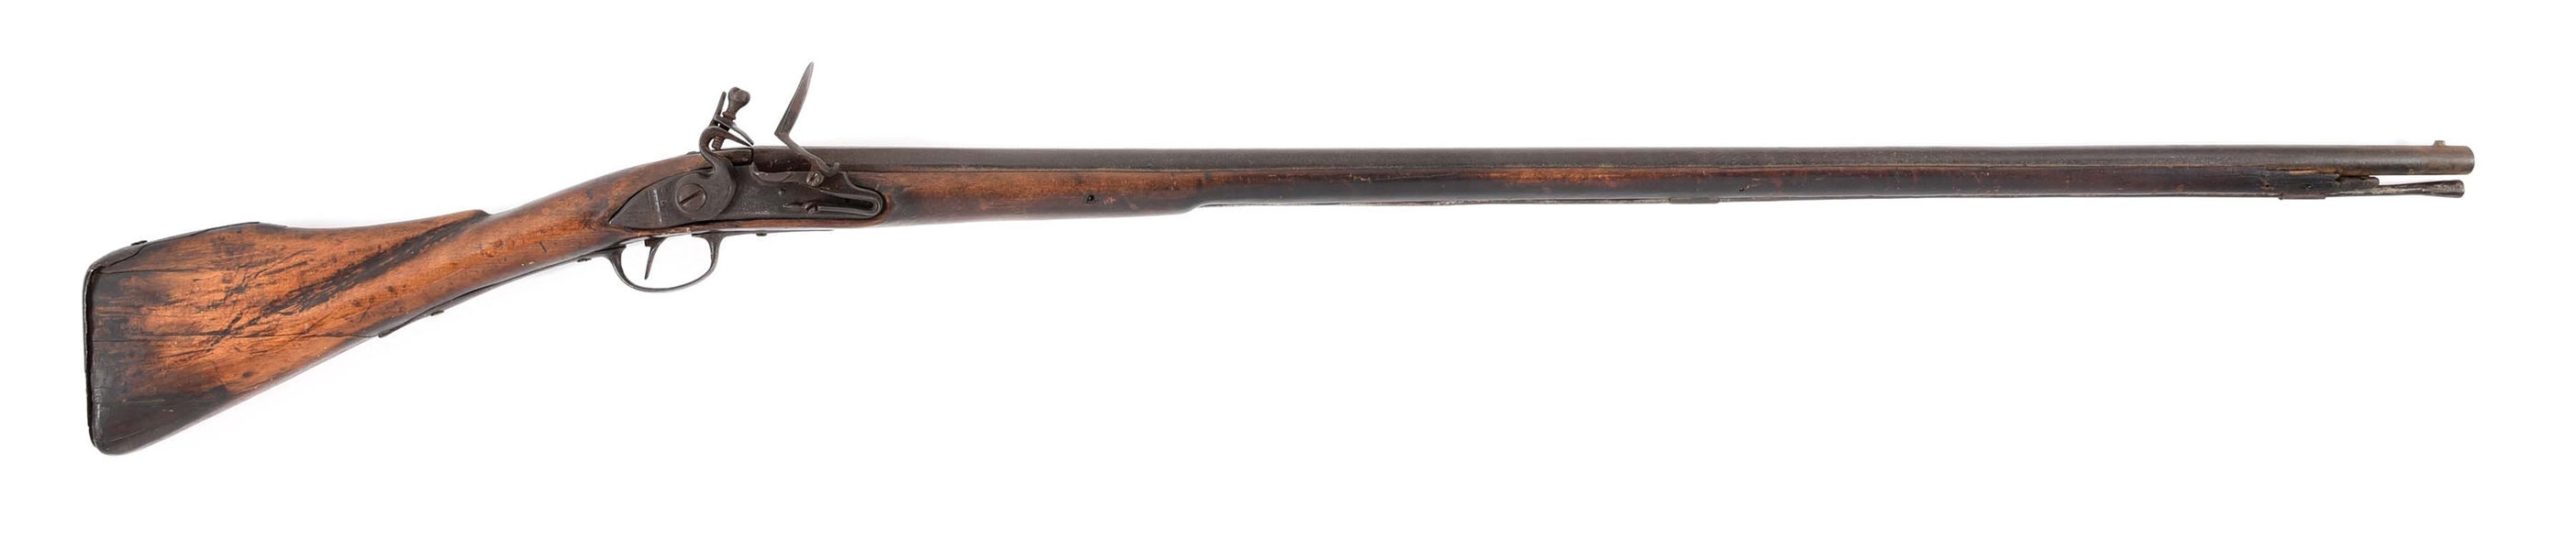 (A) IMPORTANT COMPOSITE FLINTLOCK REVOLUTIONARY WAR MUSKET ATTRIBUTED TO CAPTAIN JOSEPH ROBINS.